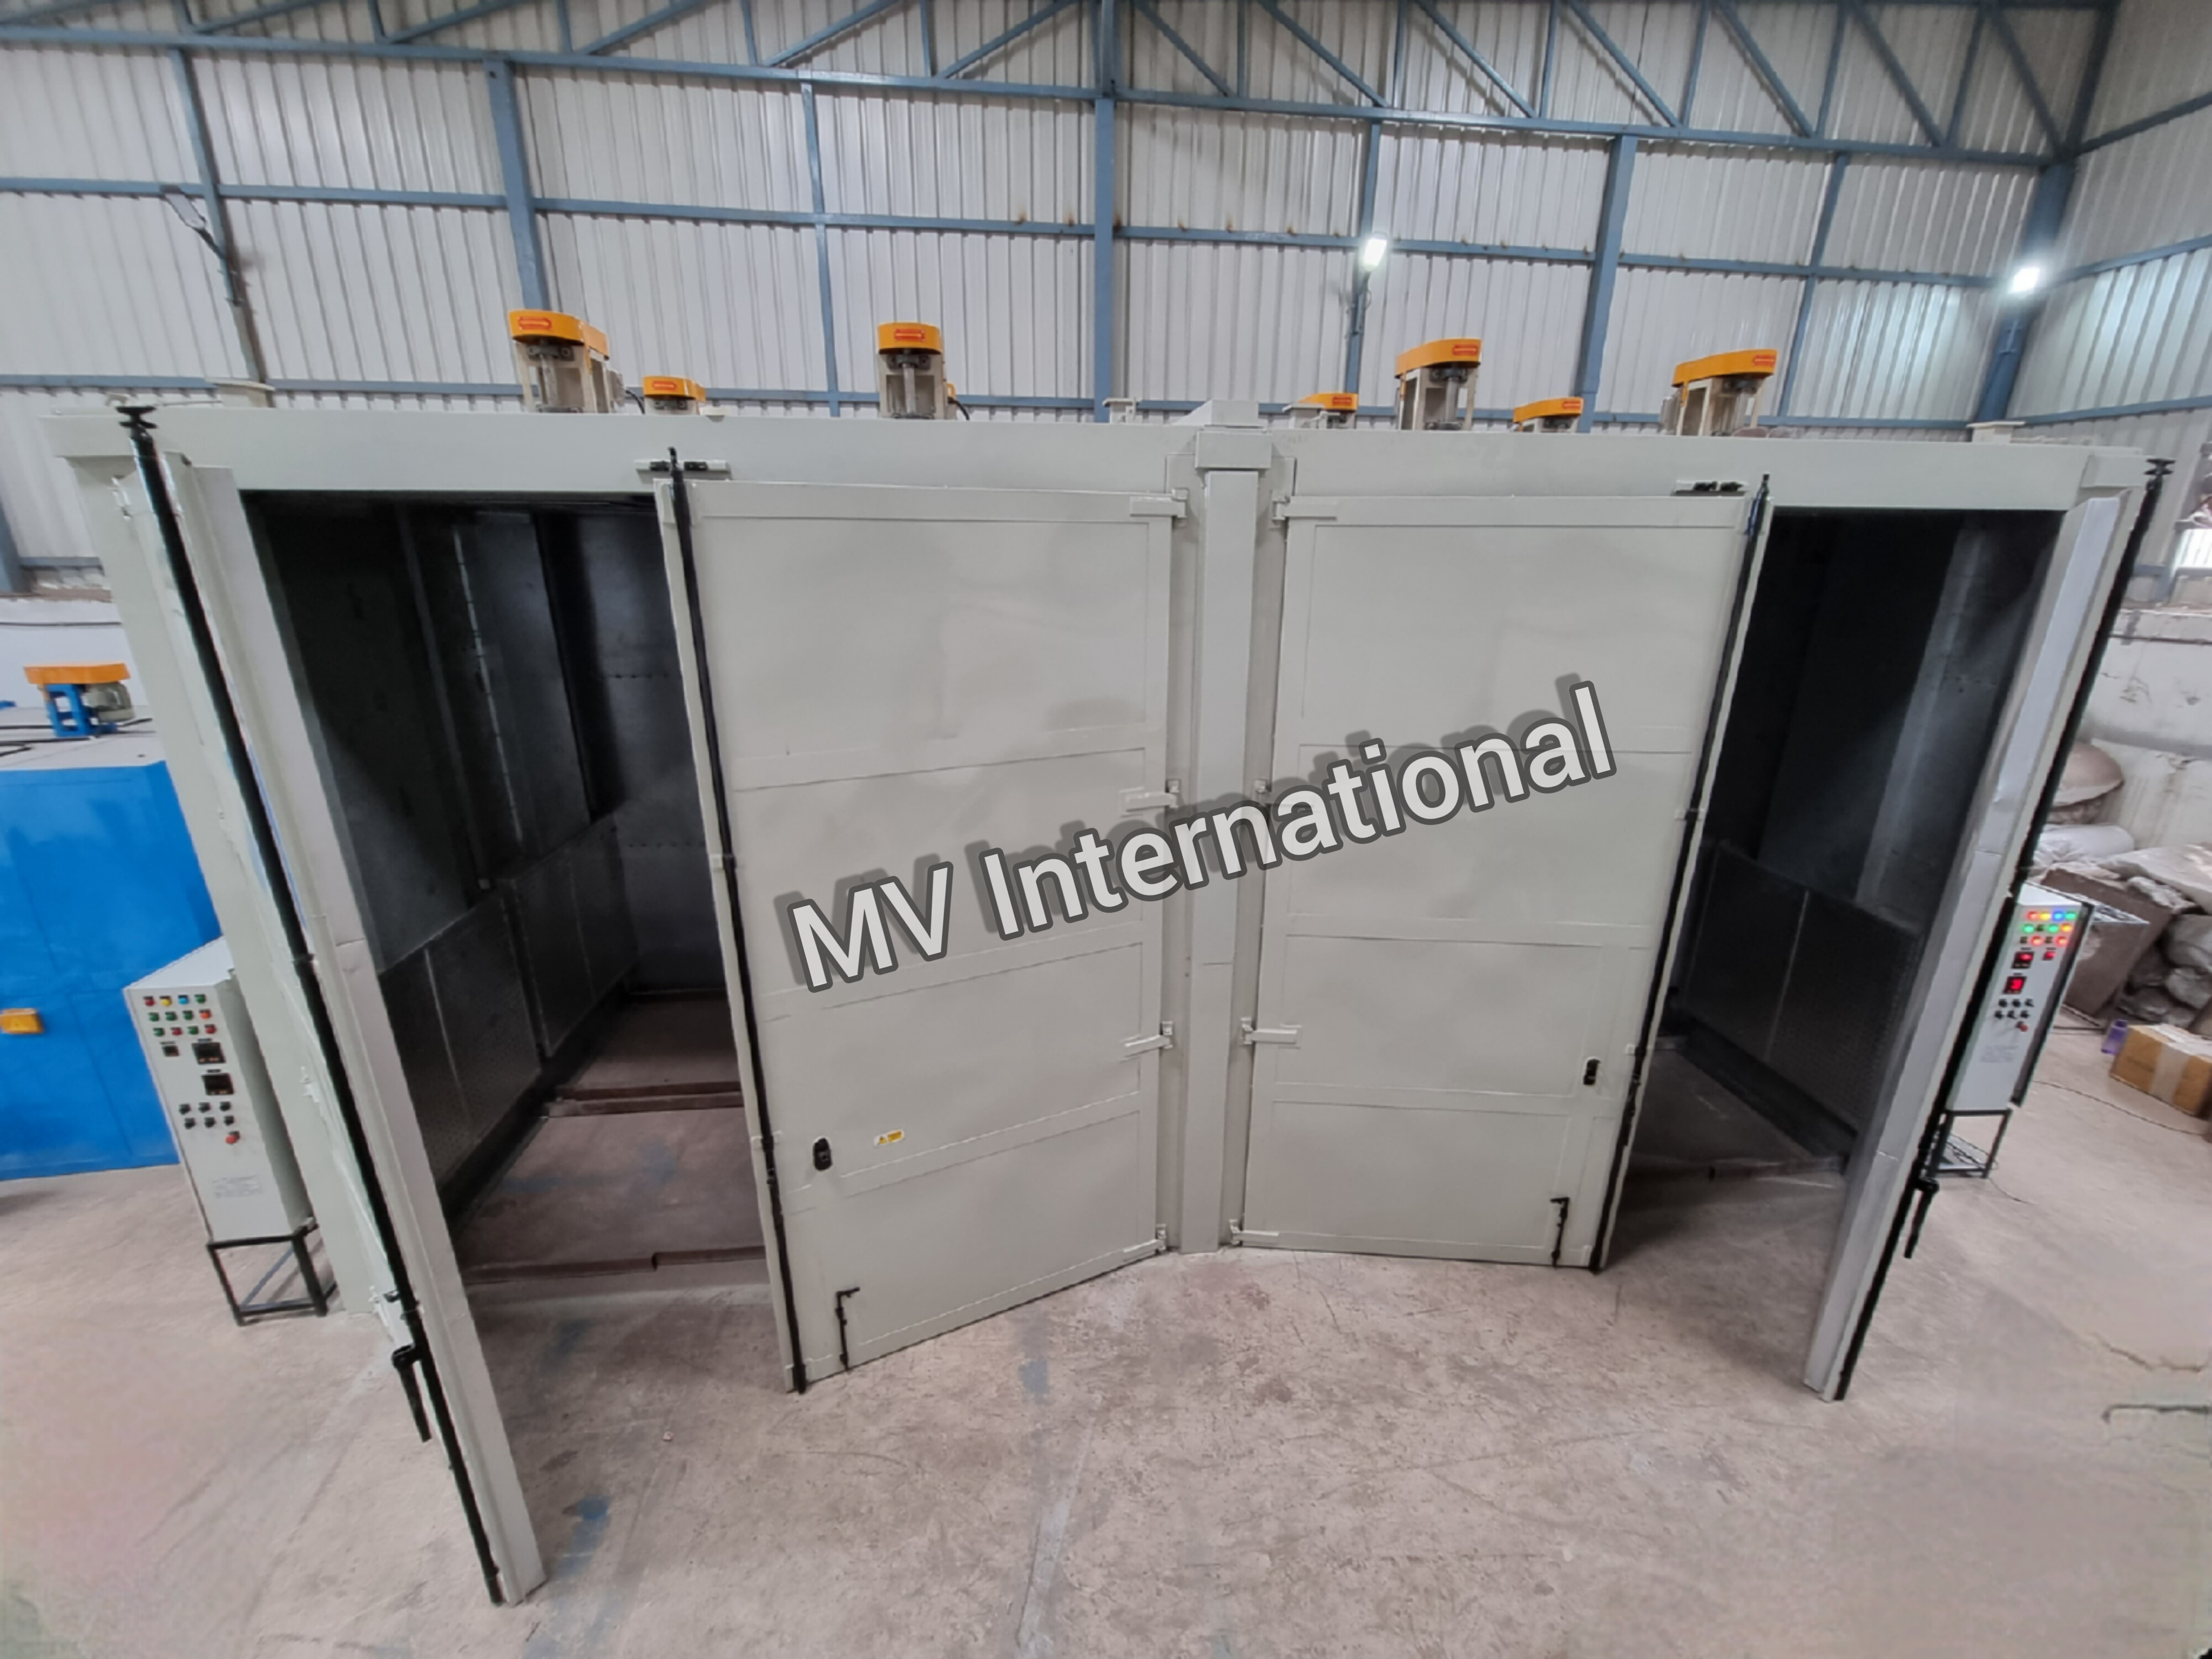 Industrial Powder Coating Batch Oven, Batch Curing Oven